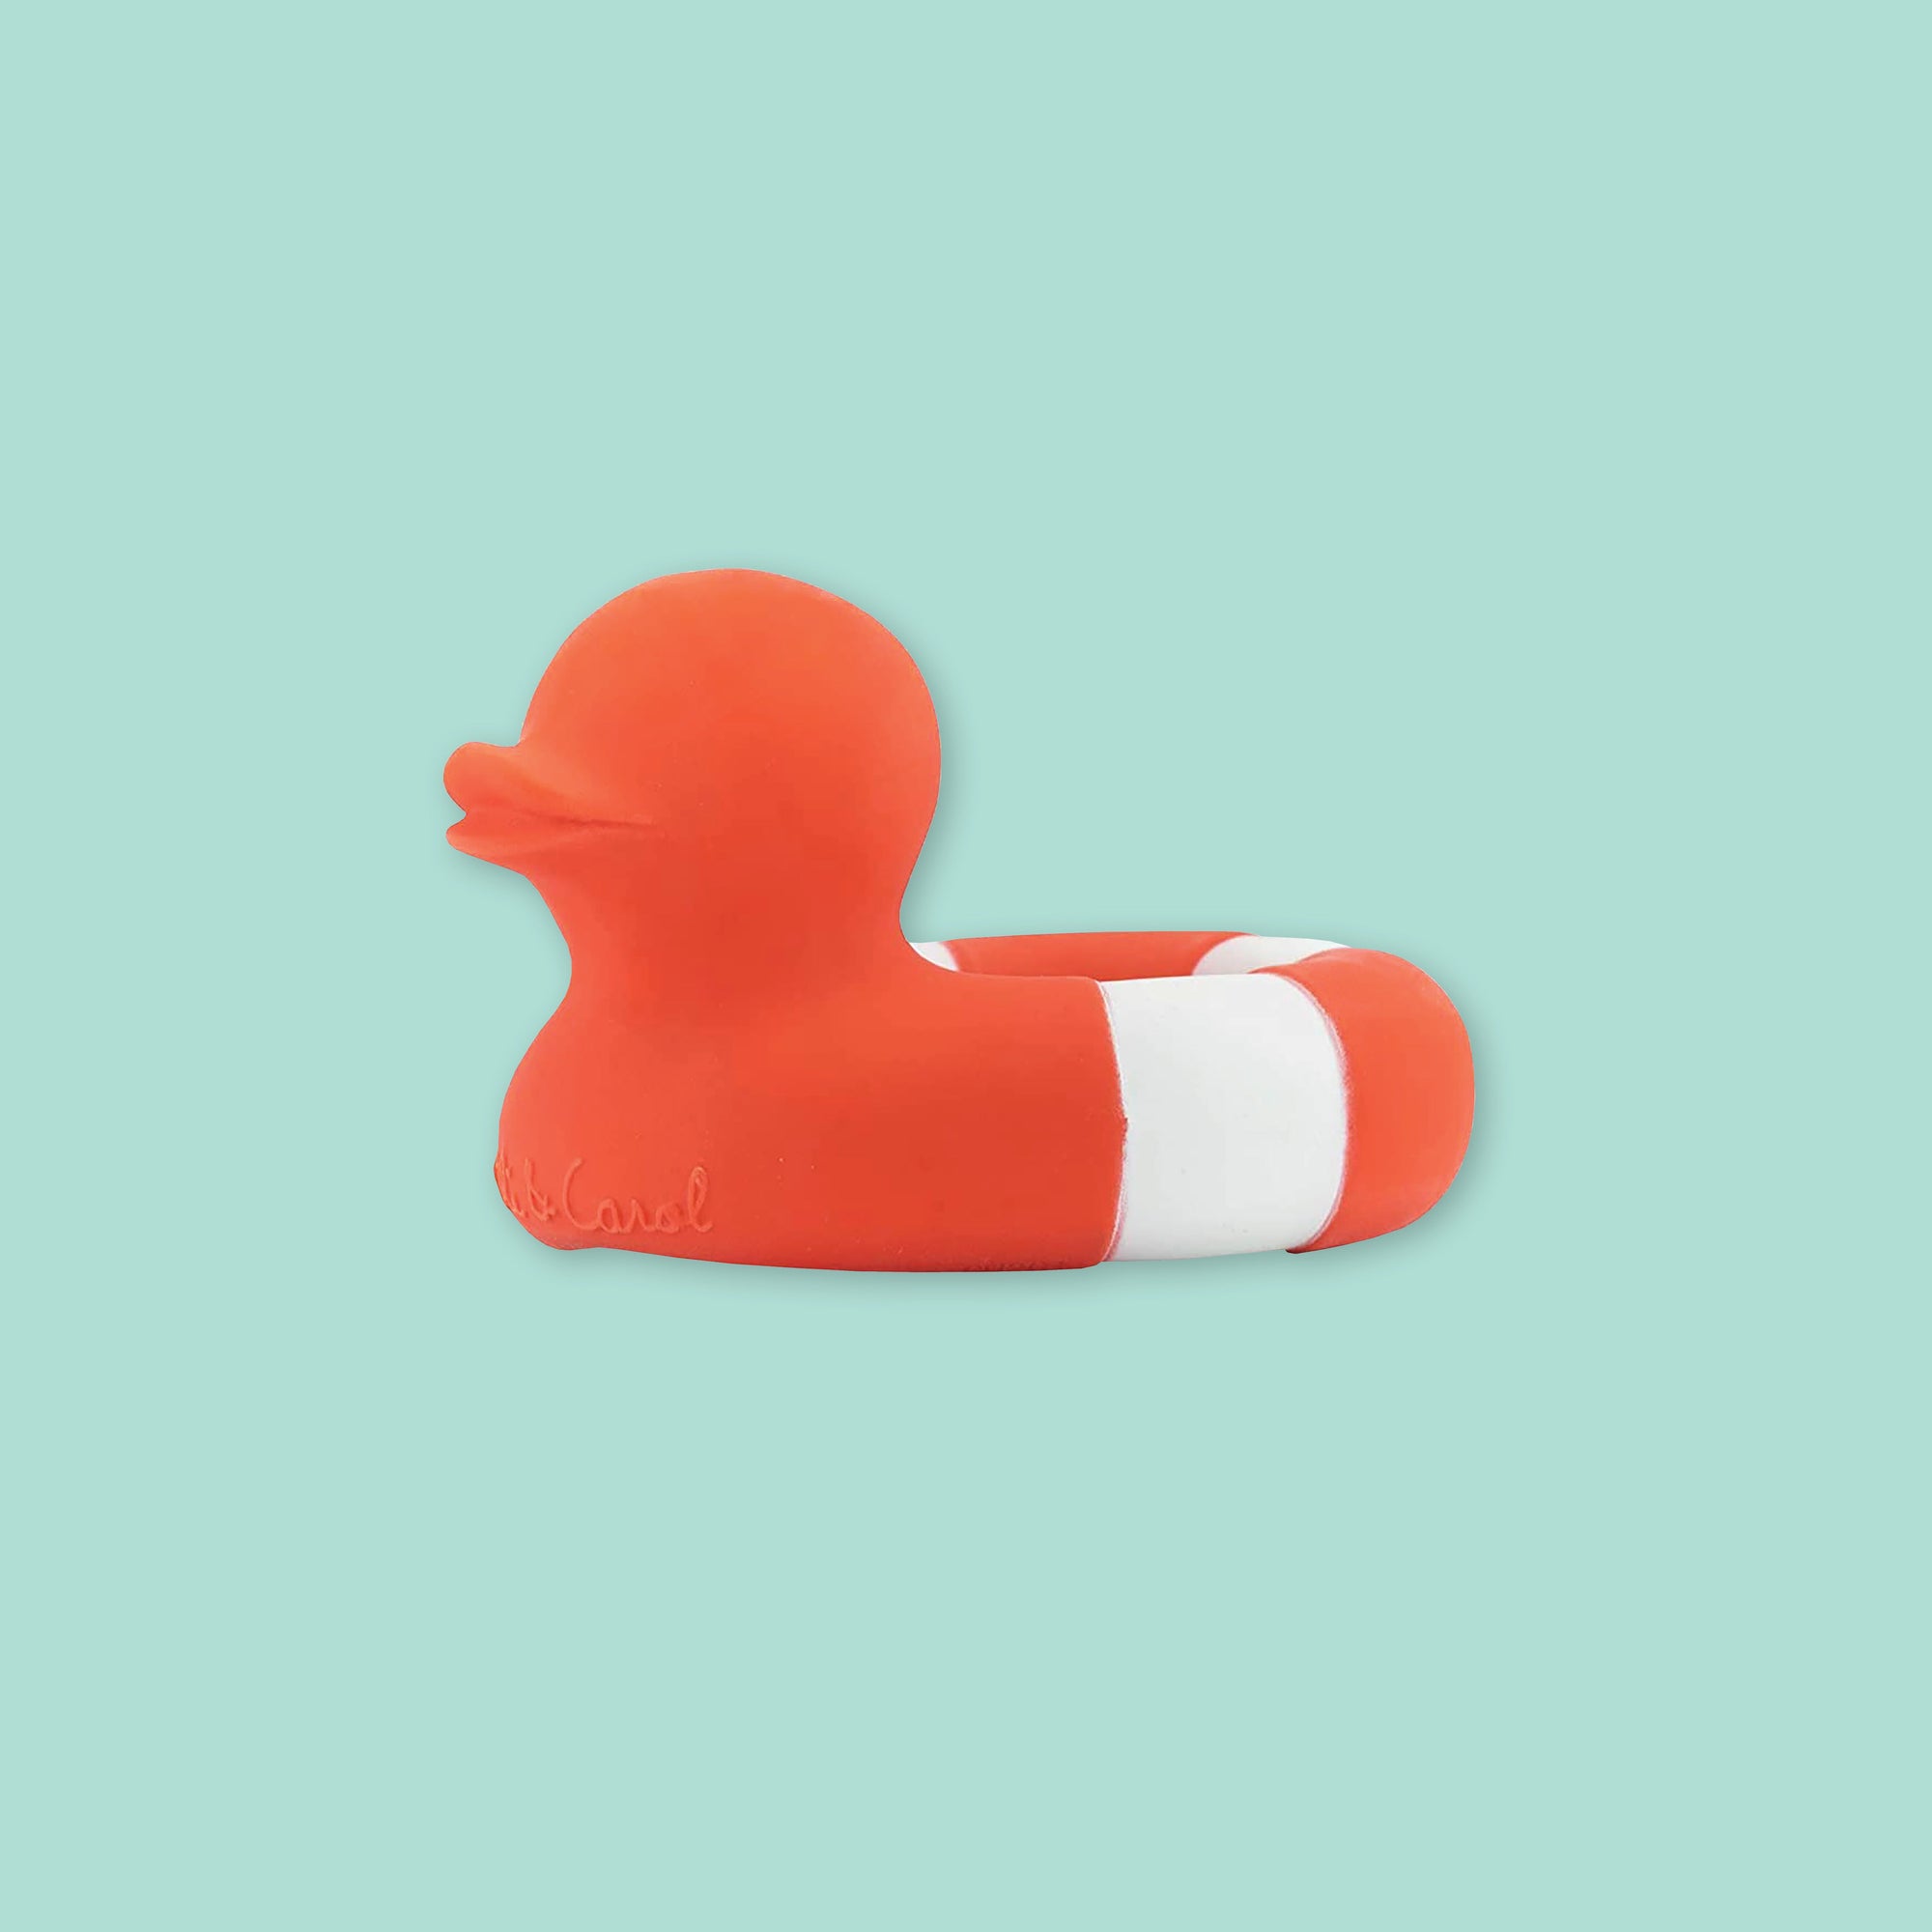 On a mint green background sits an orangey-red and white rubber duckie.